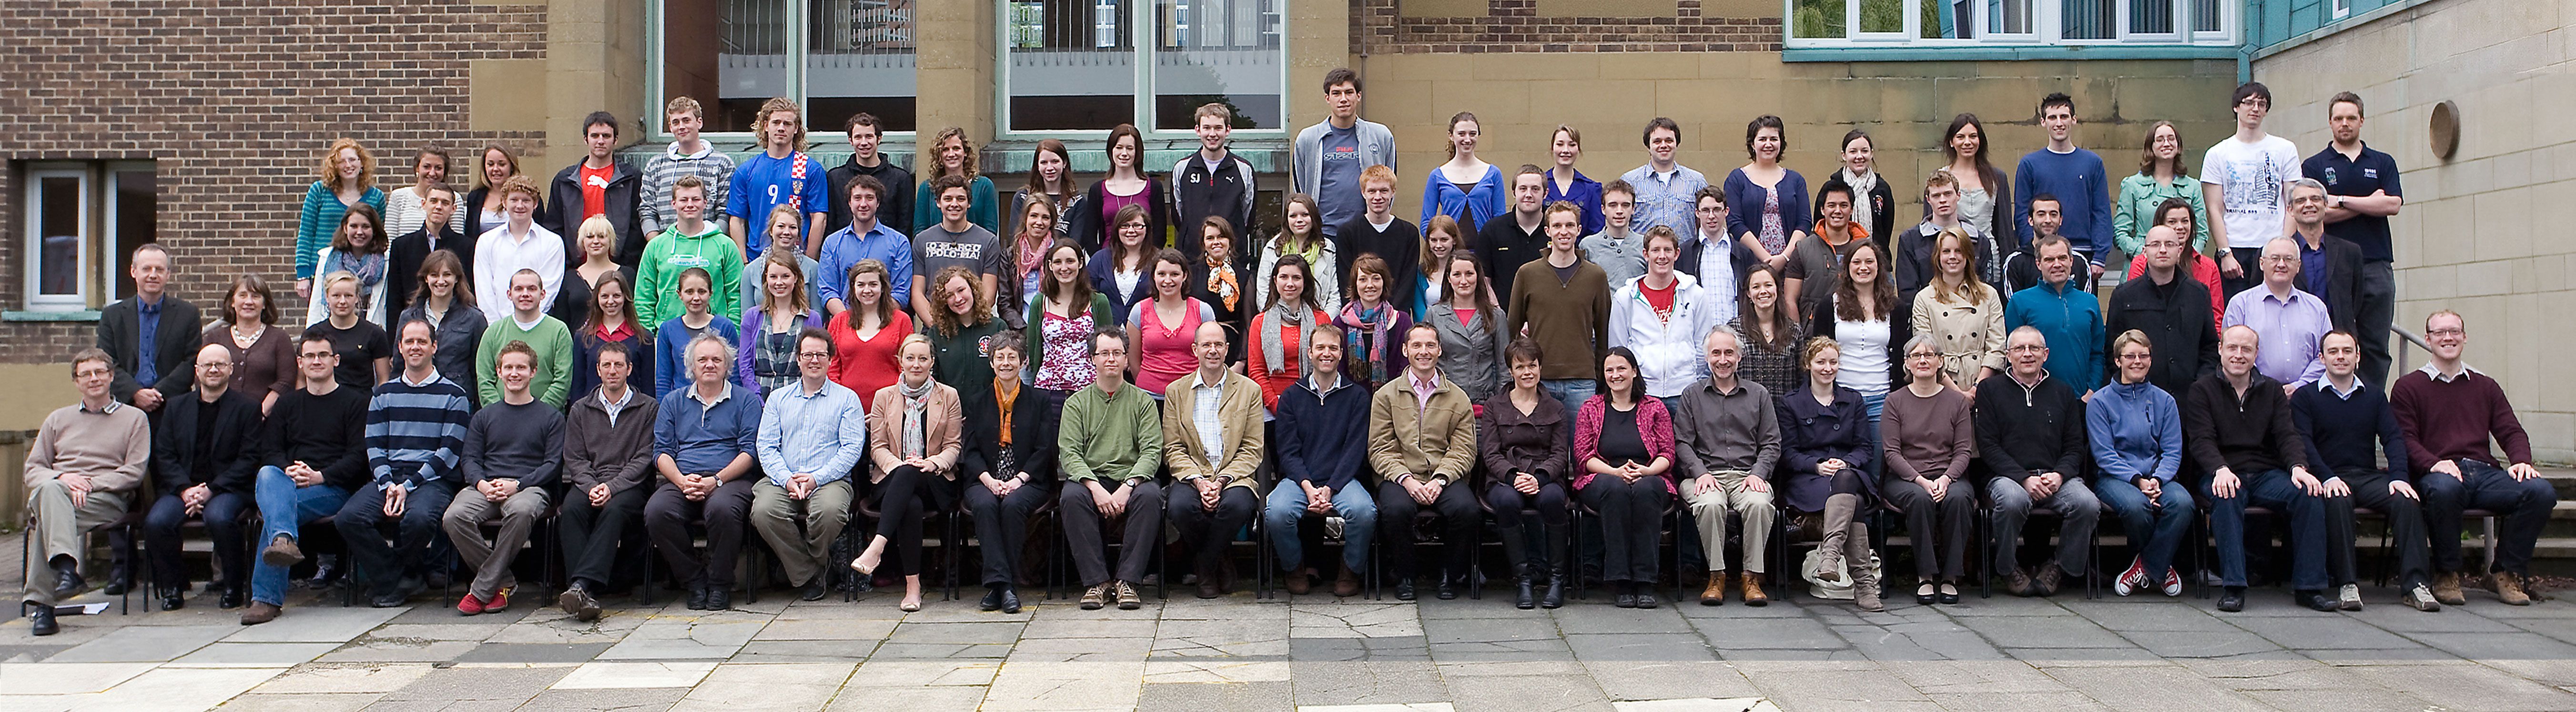 Geography Department Undergraduate Group photo from 2010